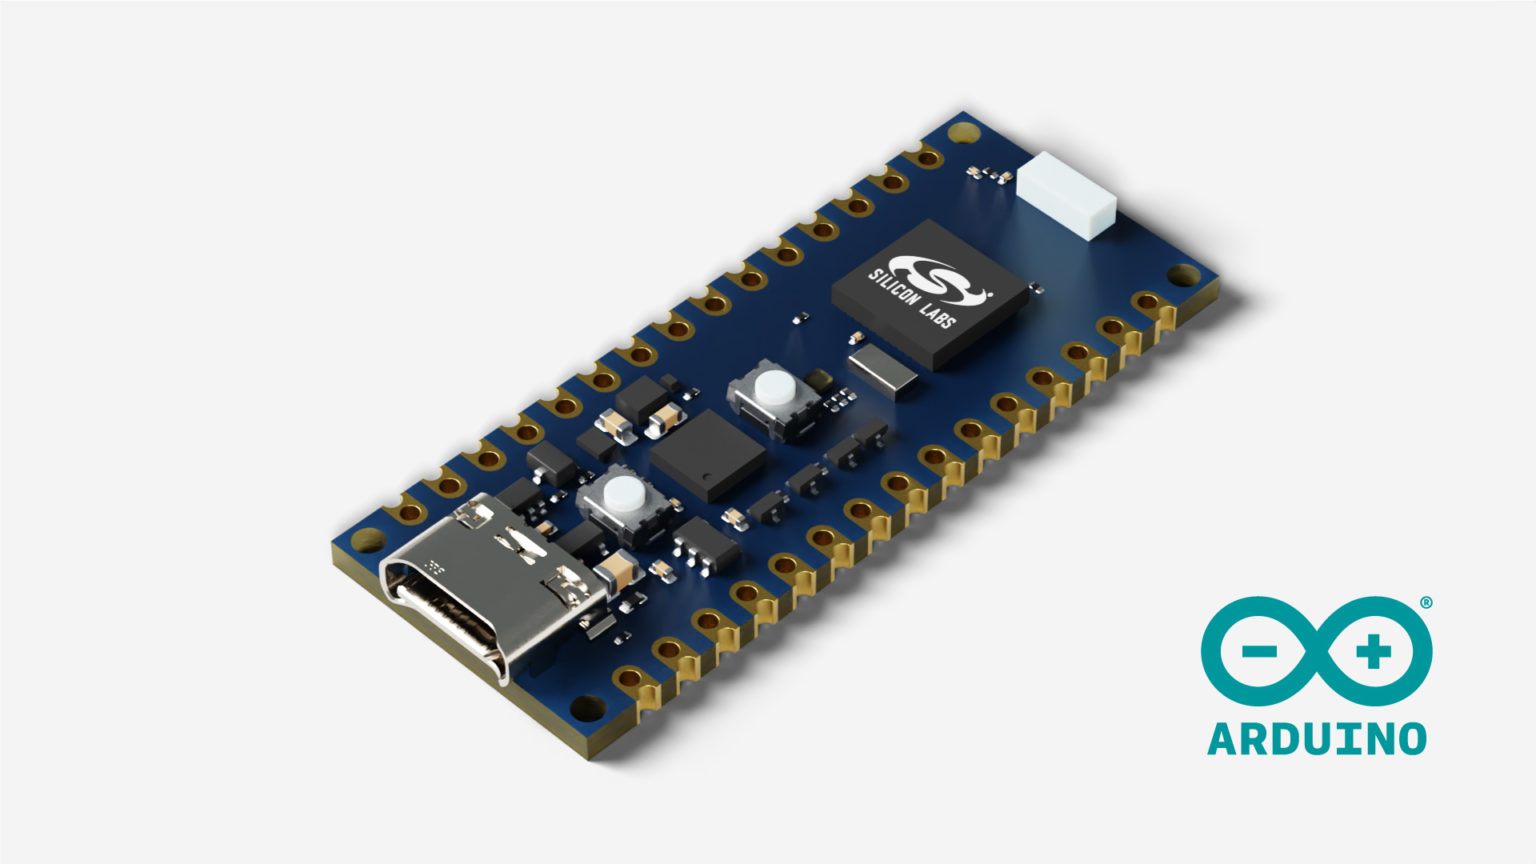 Arduino and Silicon Labs provide support for the Matter standard and hints the release of a new Arduino Nano